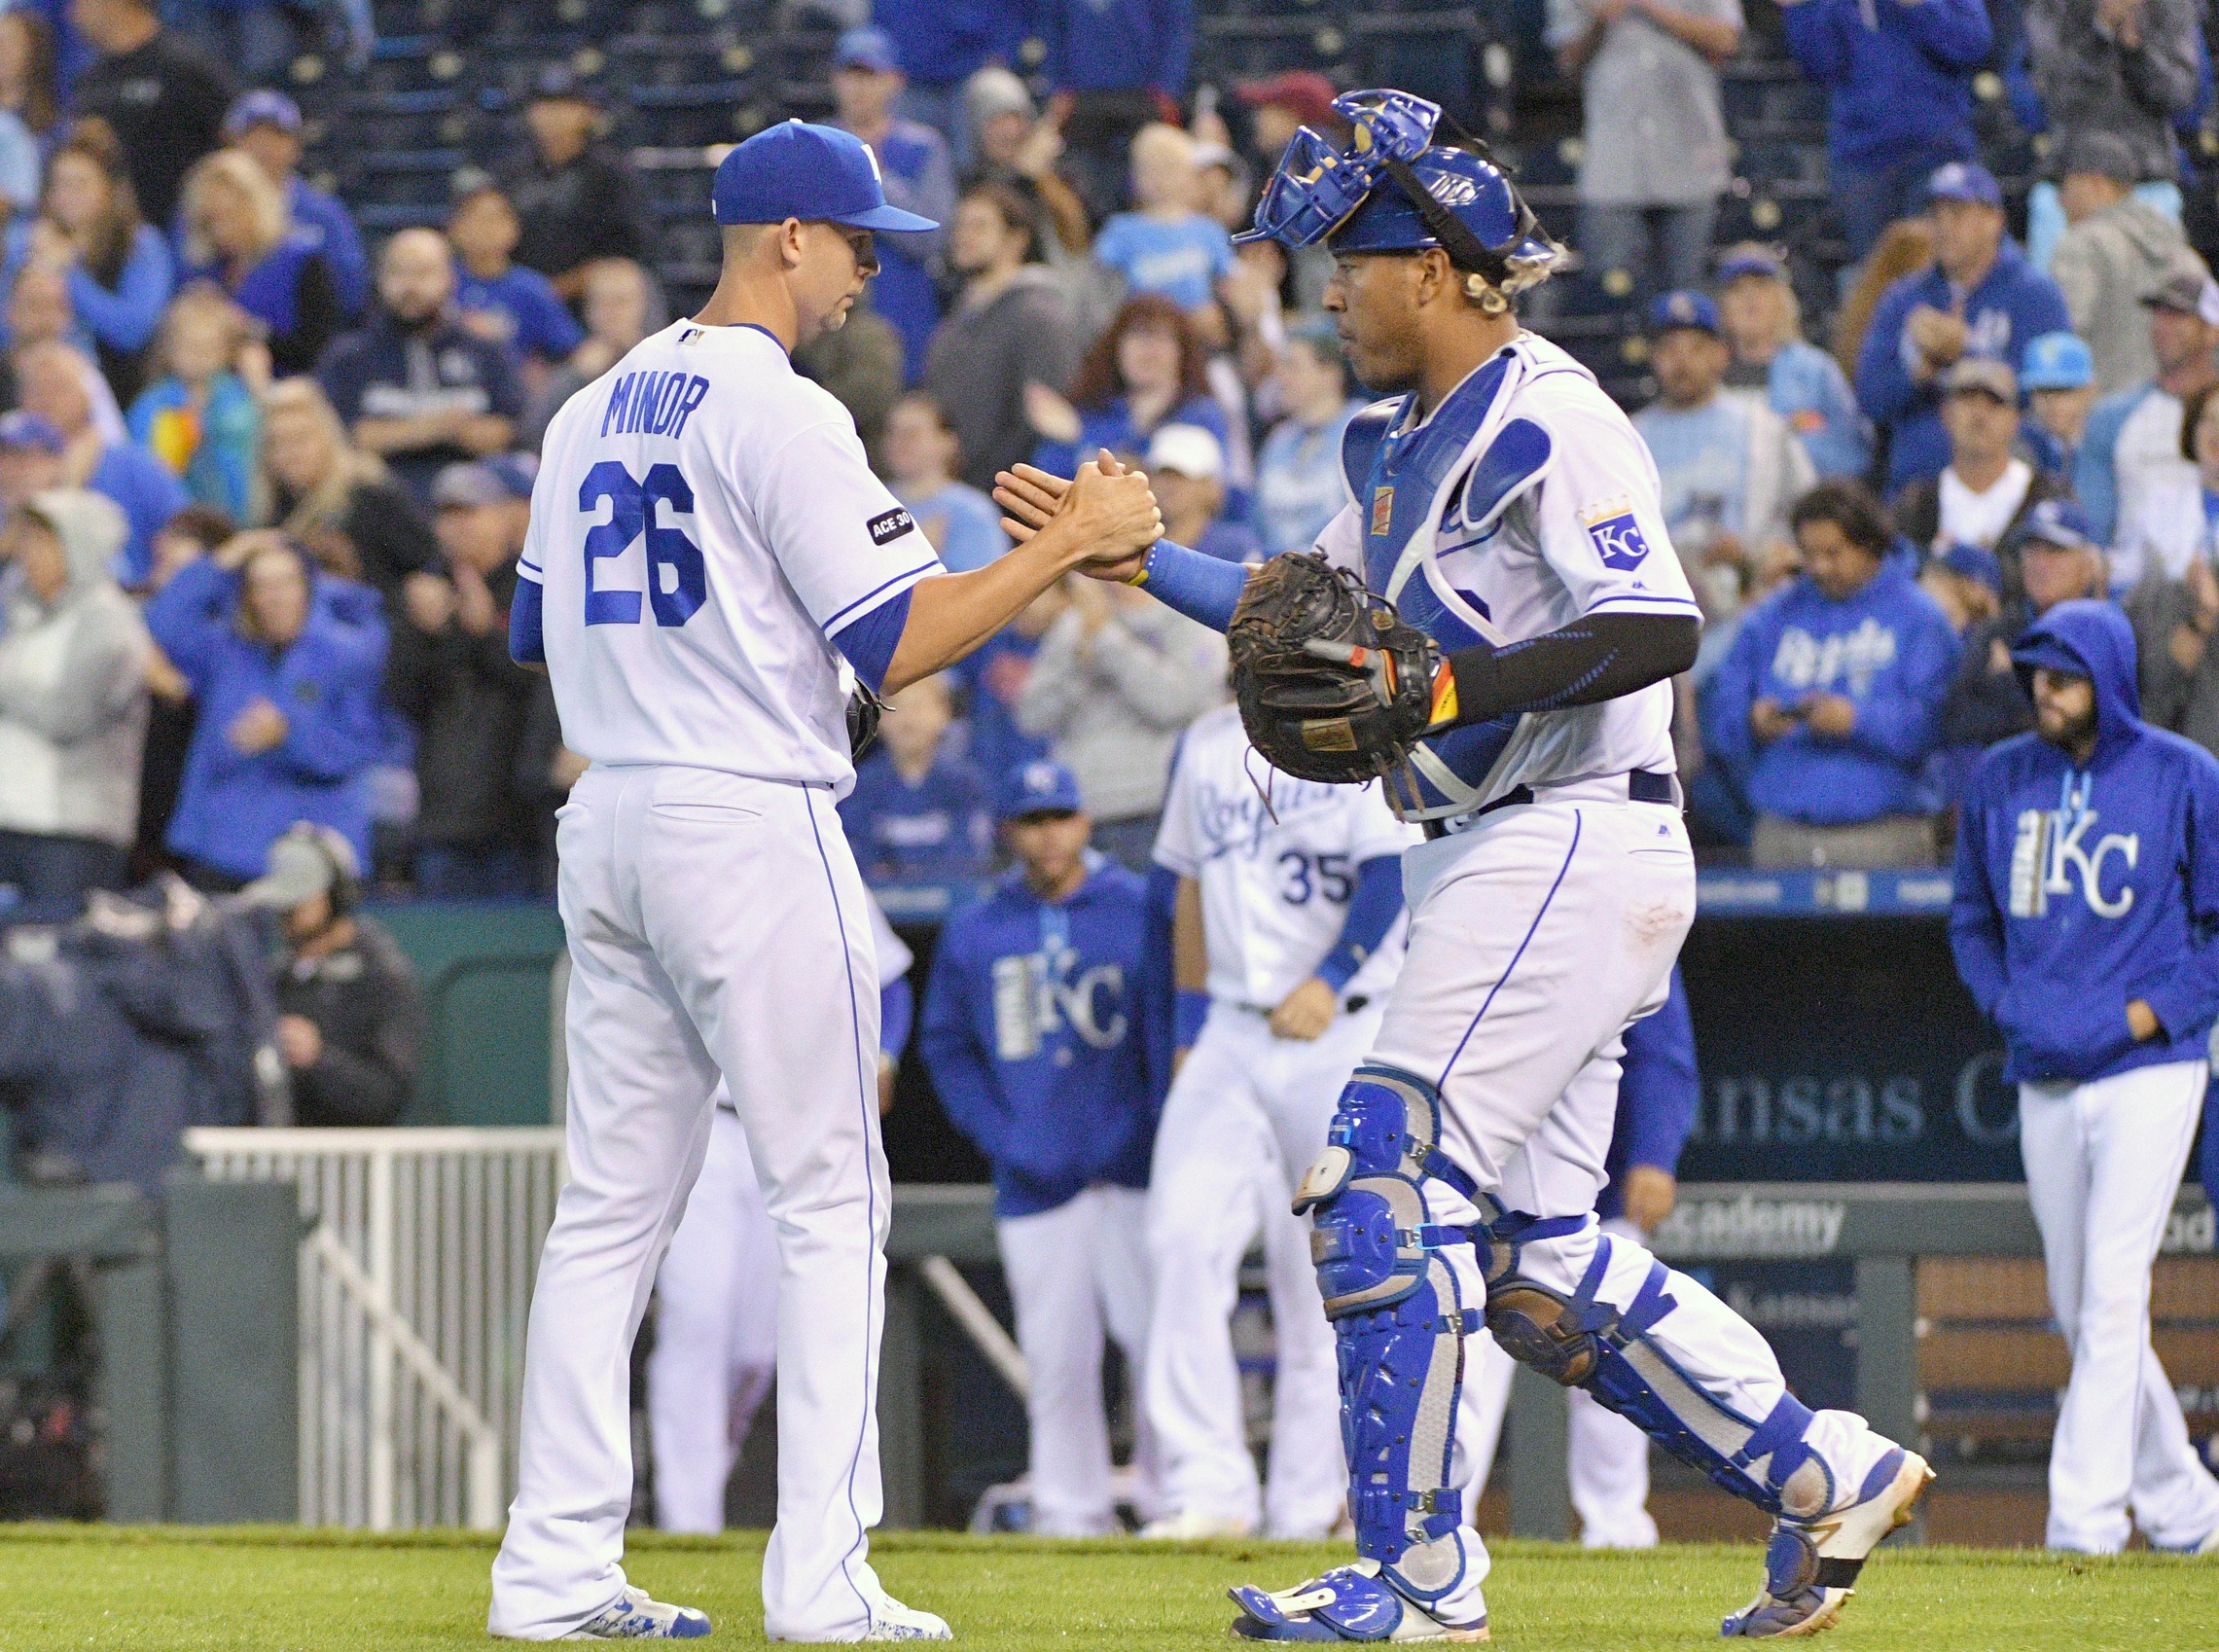 Sep 26, 2017; Kansas City, MO, USA; Kansas City Royals relief pitcher Mike Minor (26) is congratulated by catcher Salvador Perez (13) after a win over the Detroit Tigers at Kauffman Stadium. Mandatory Credit: Denny Medley-USA TODAY Sports